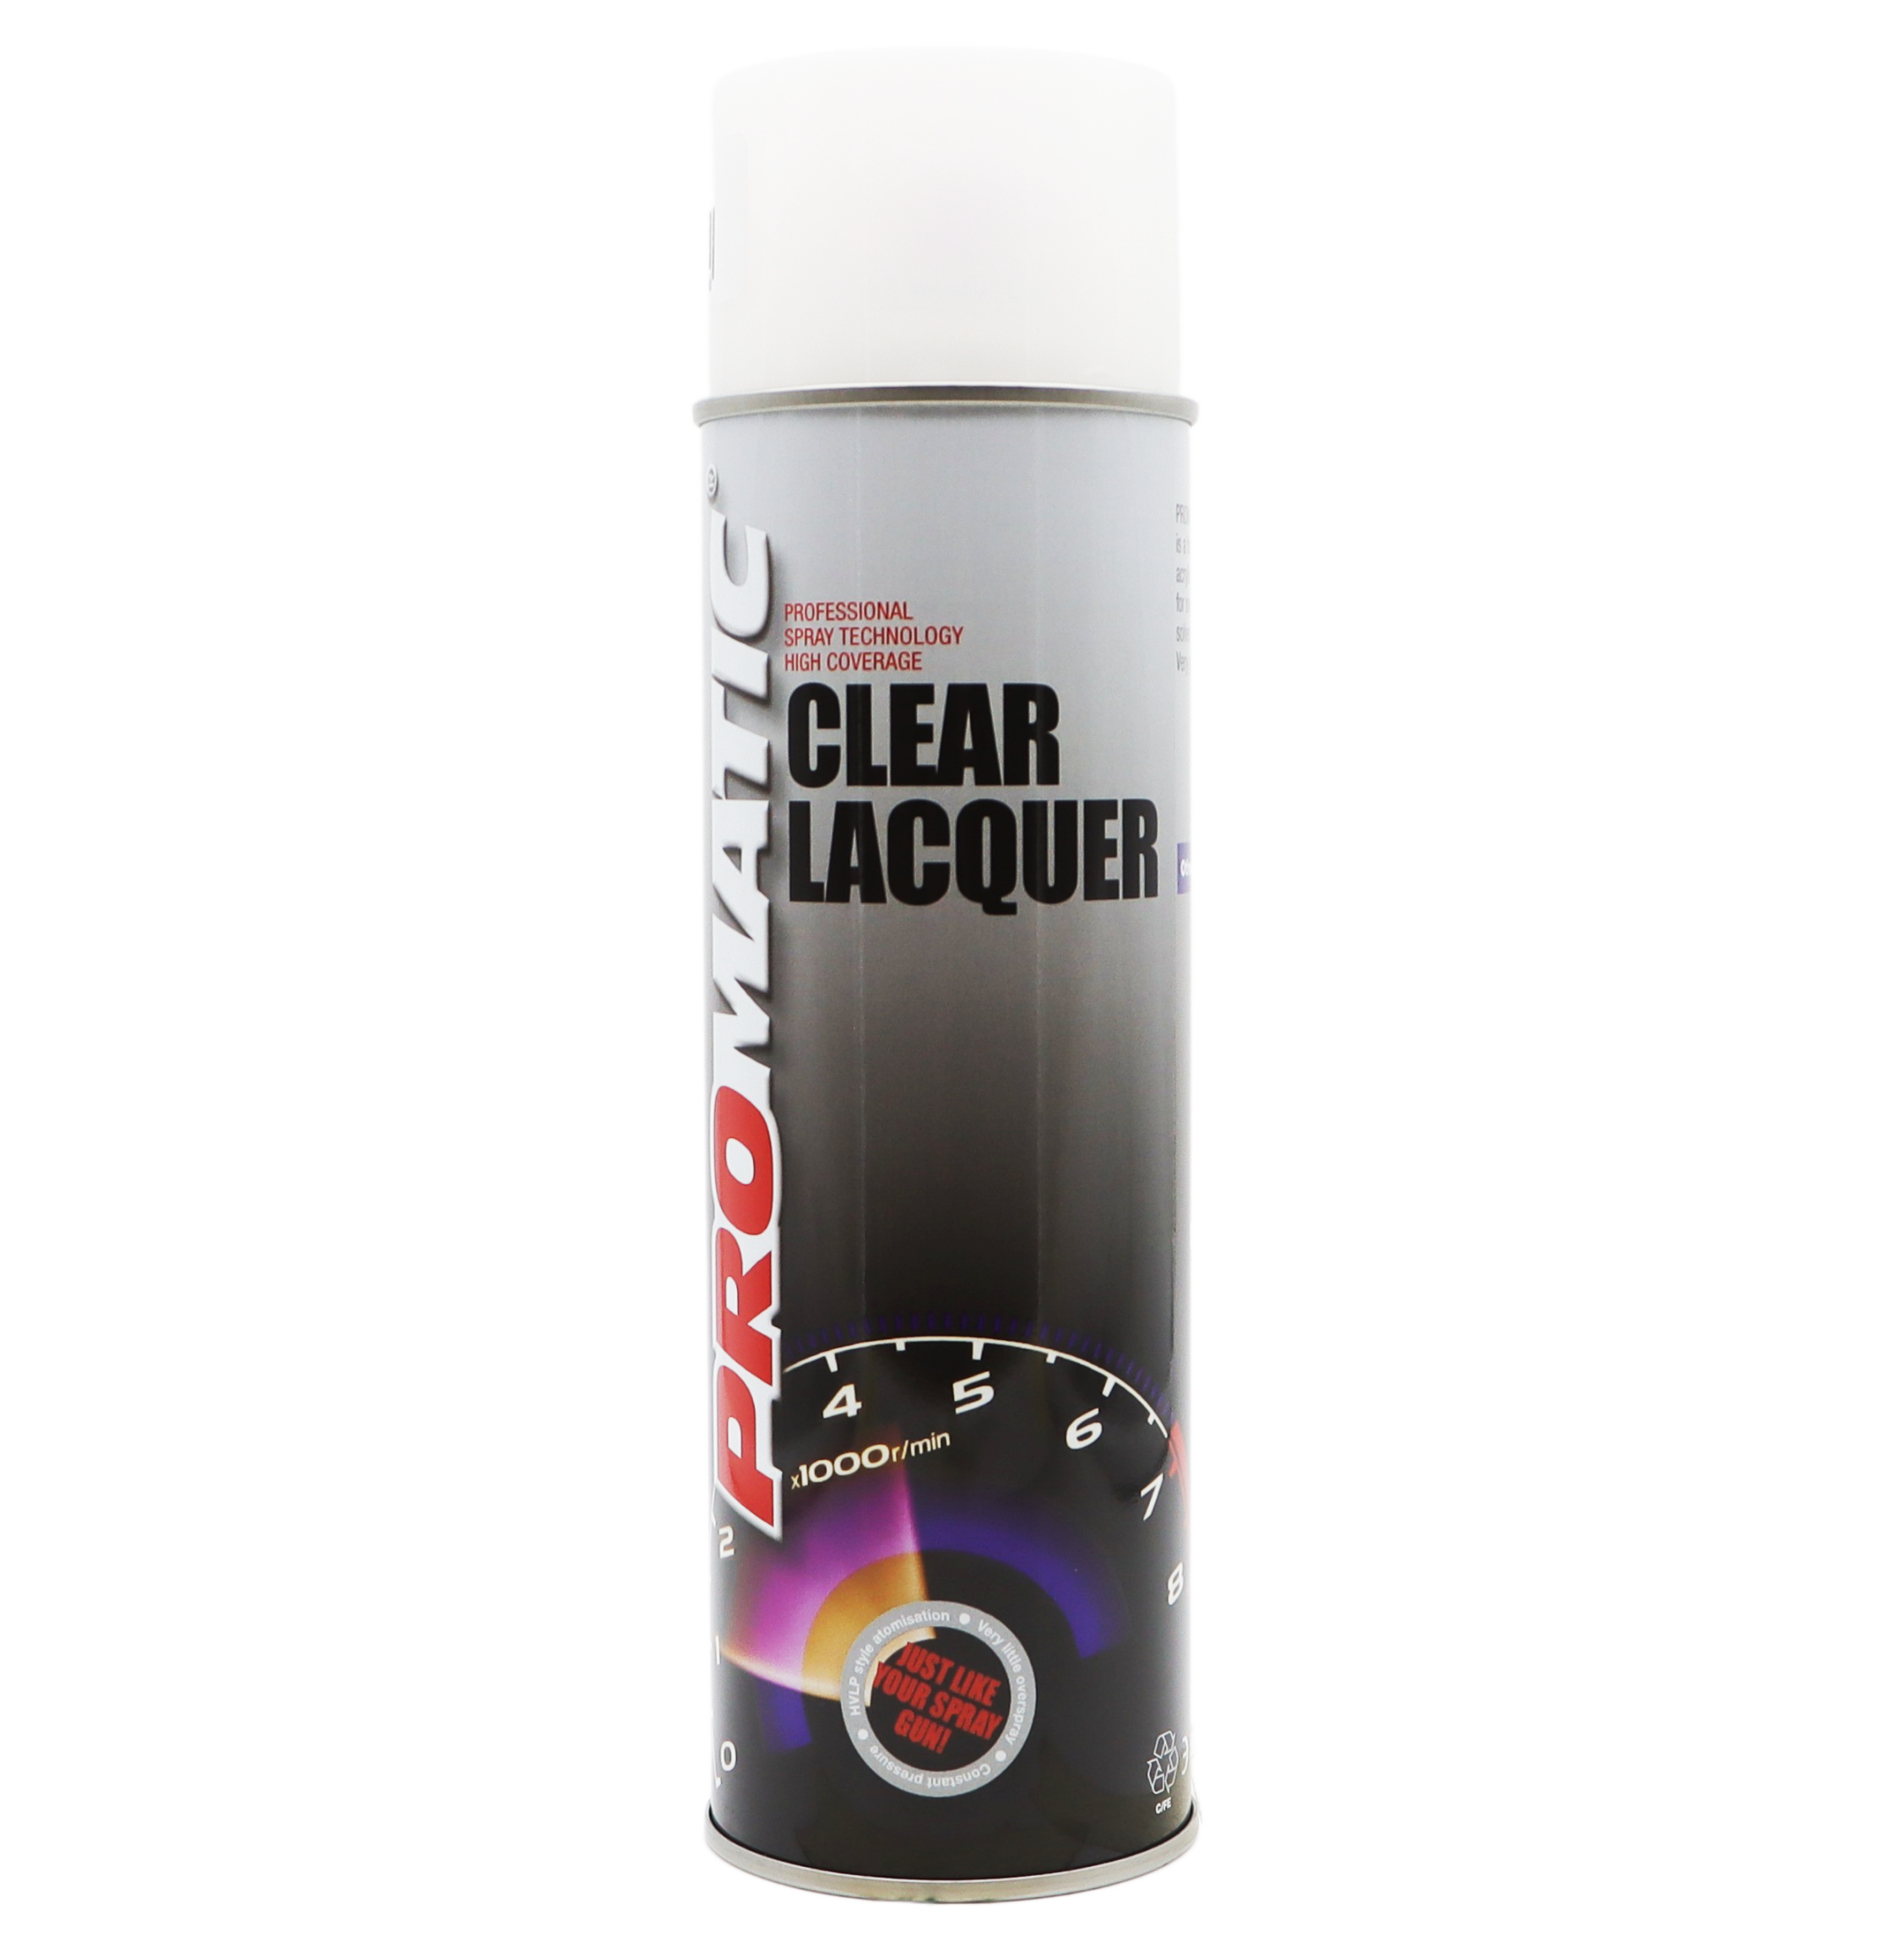 Clear Lacquer Aerosol (500ml) Product Image